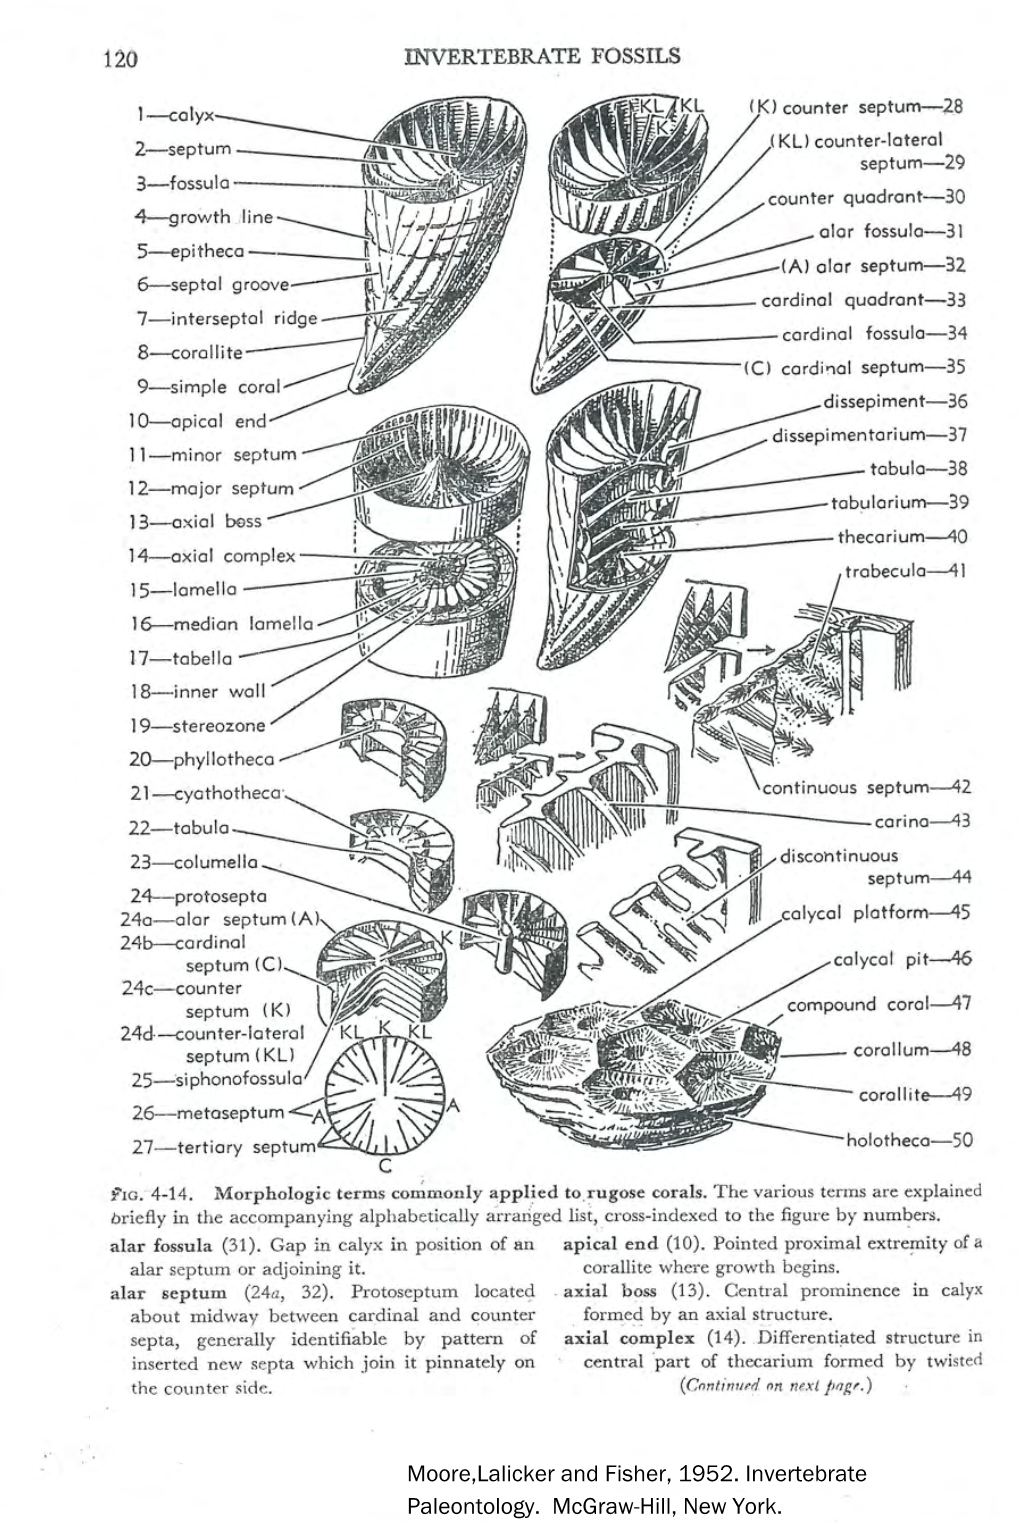 Bryozoan and Coral Terminology